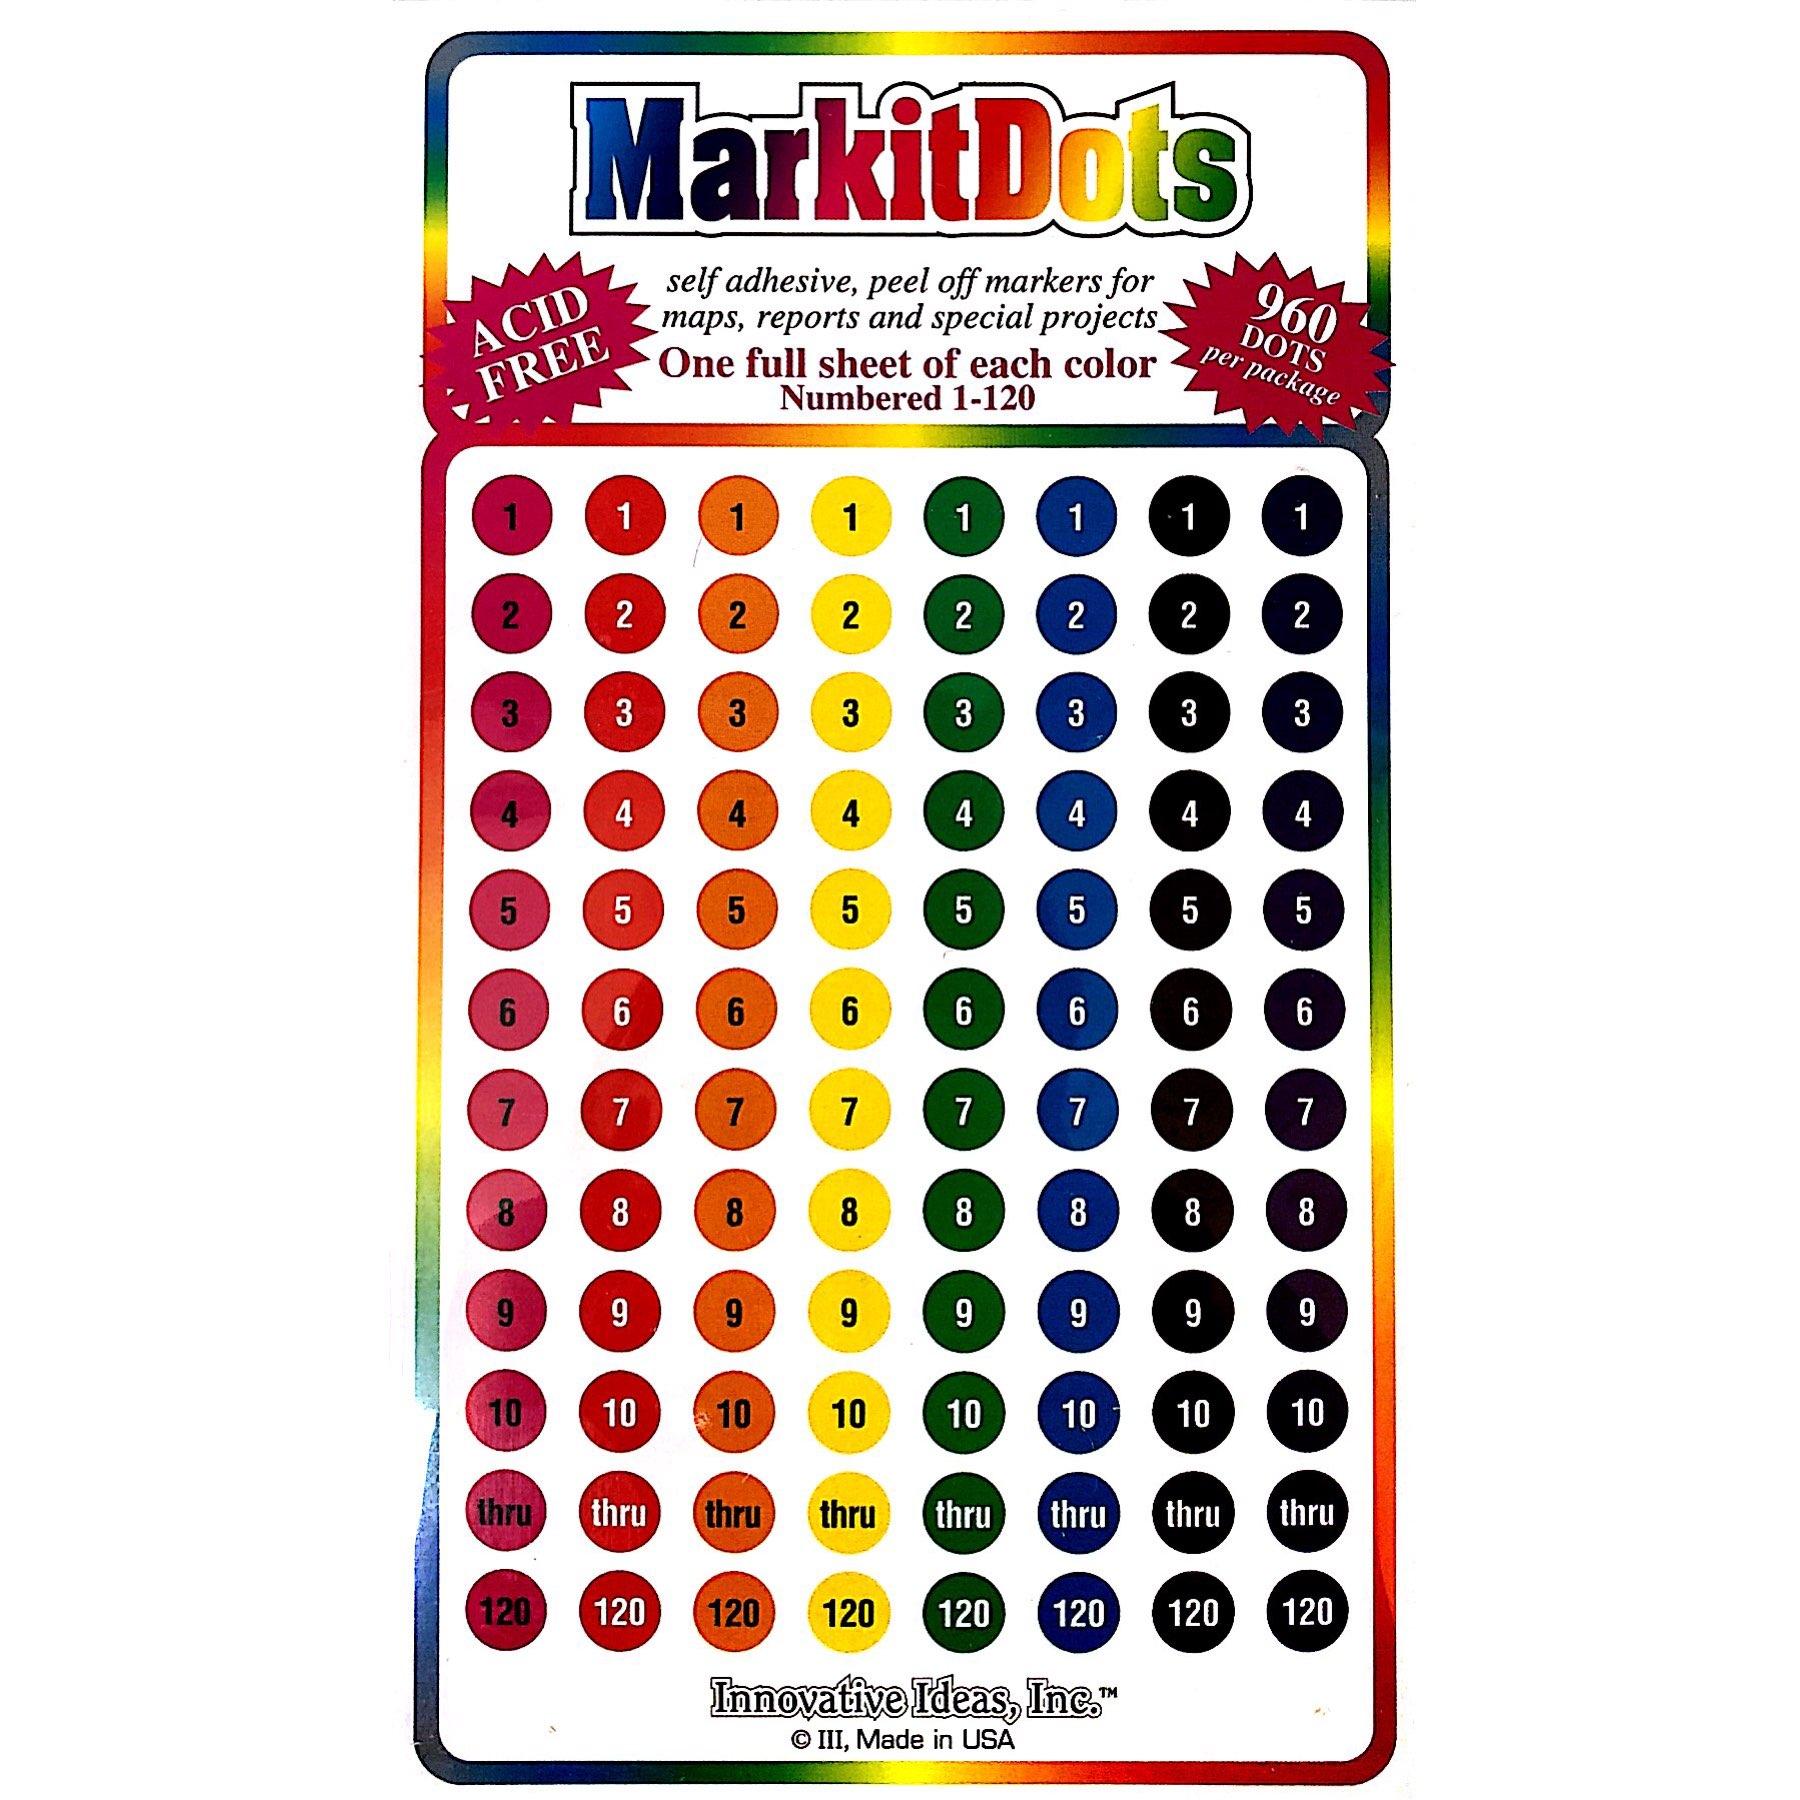 Medium 1/4 Removable Numbered 1-120 Mark-It Brand Dots for Maps, Reports or Projects - Eight Color Pack